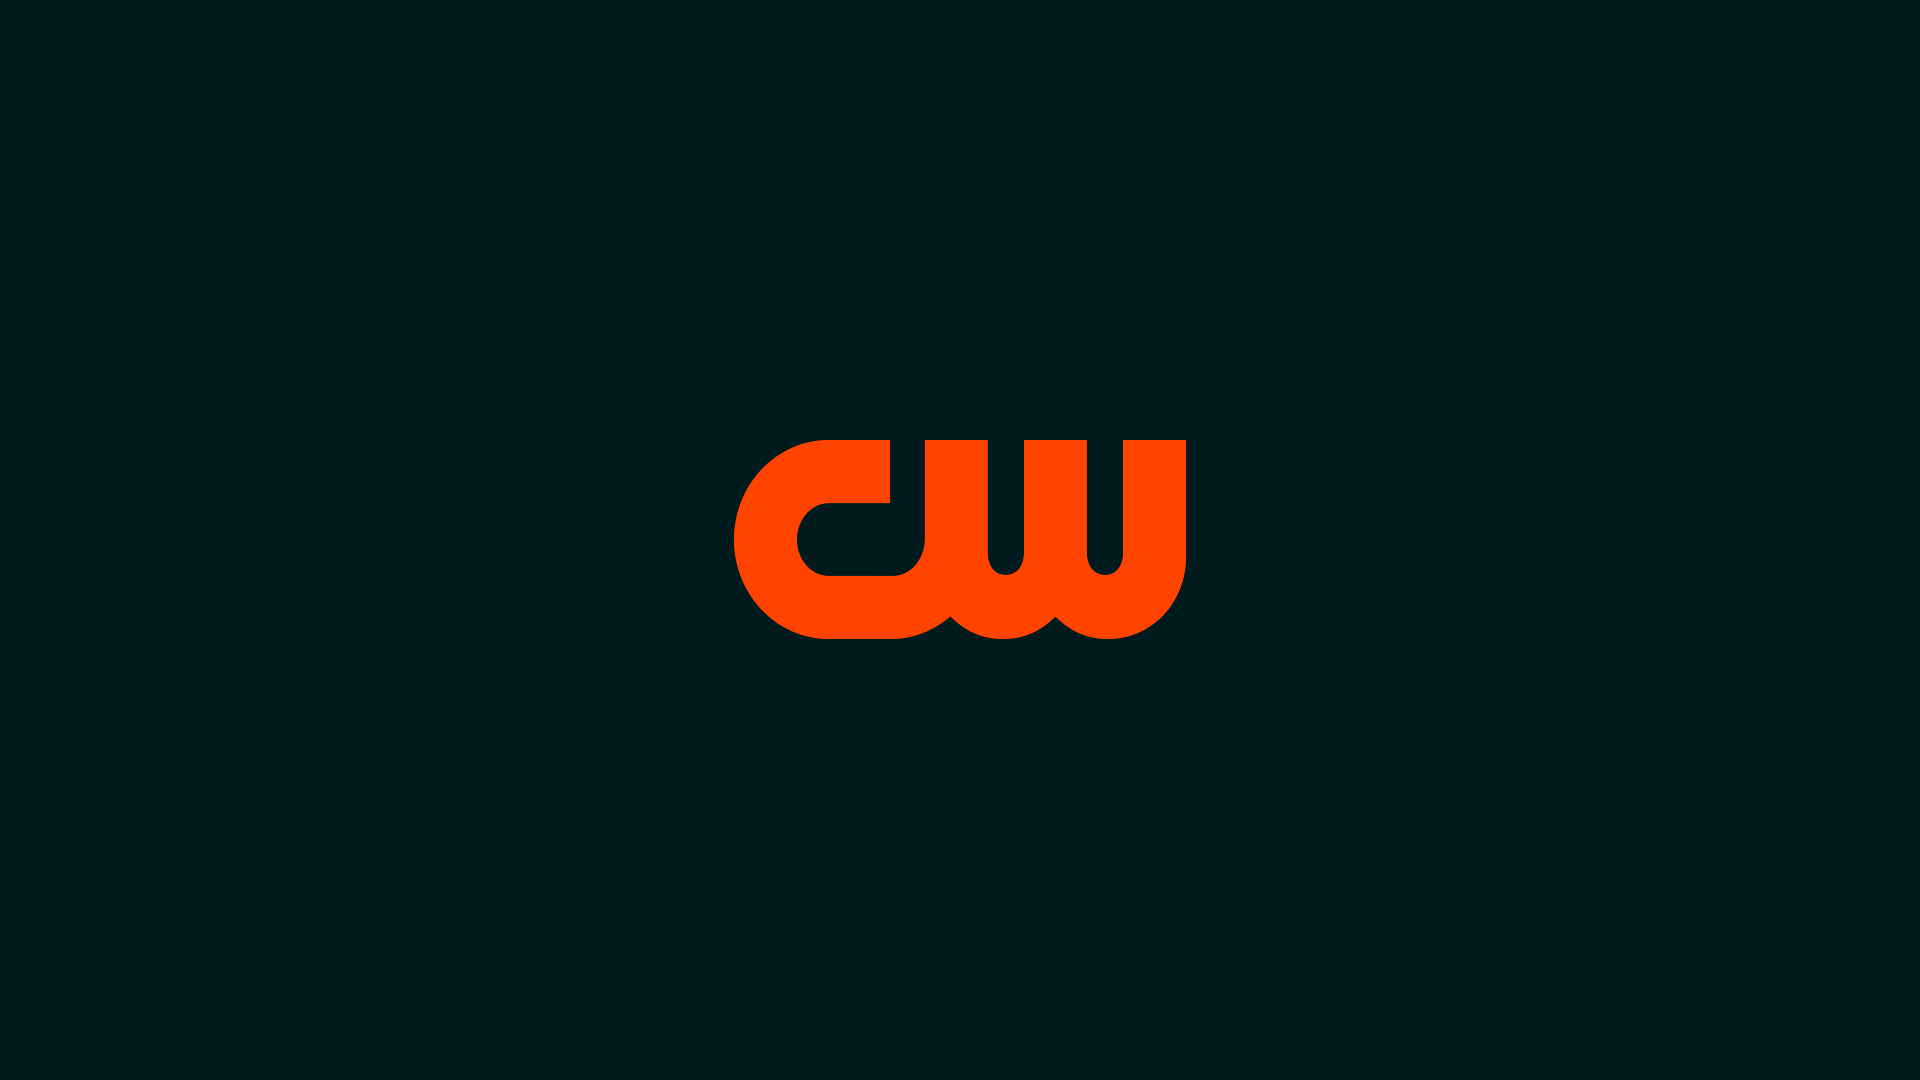 The CW Partners With Range Sports to Bring New Live Sporting Events to The Network